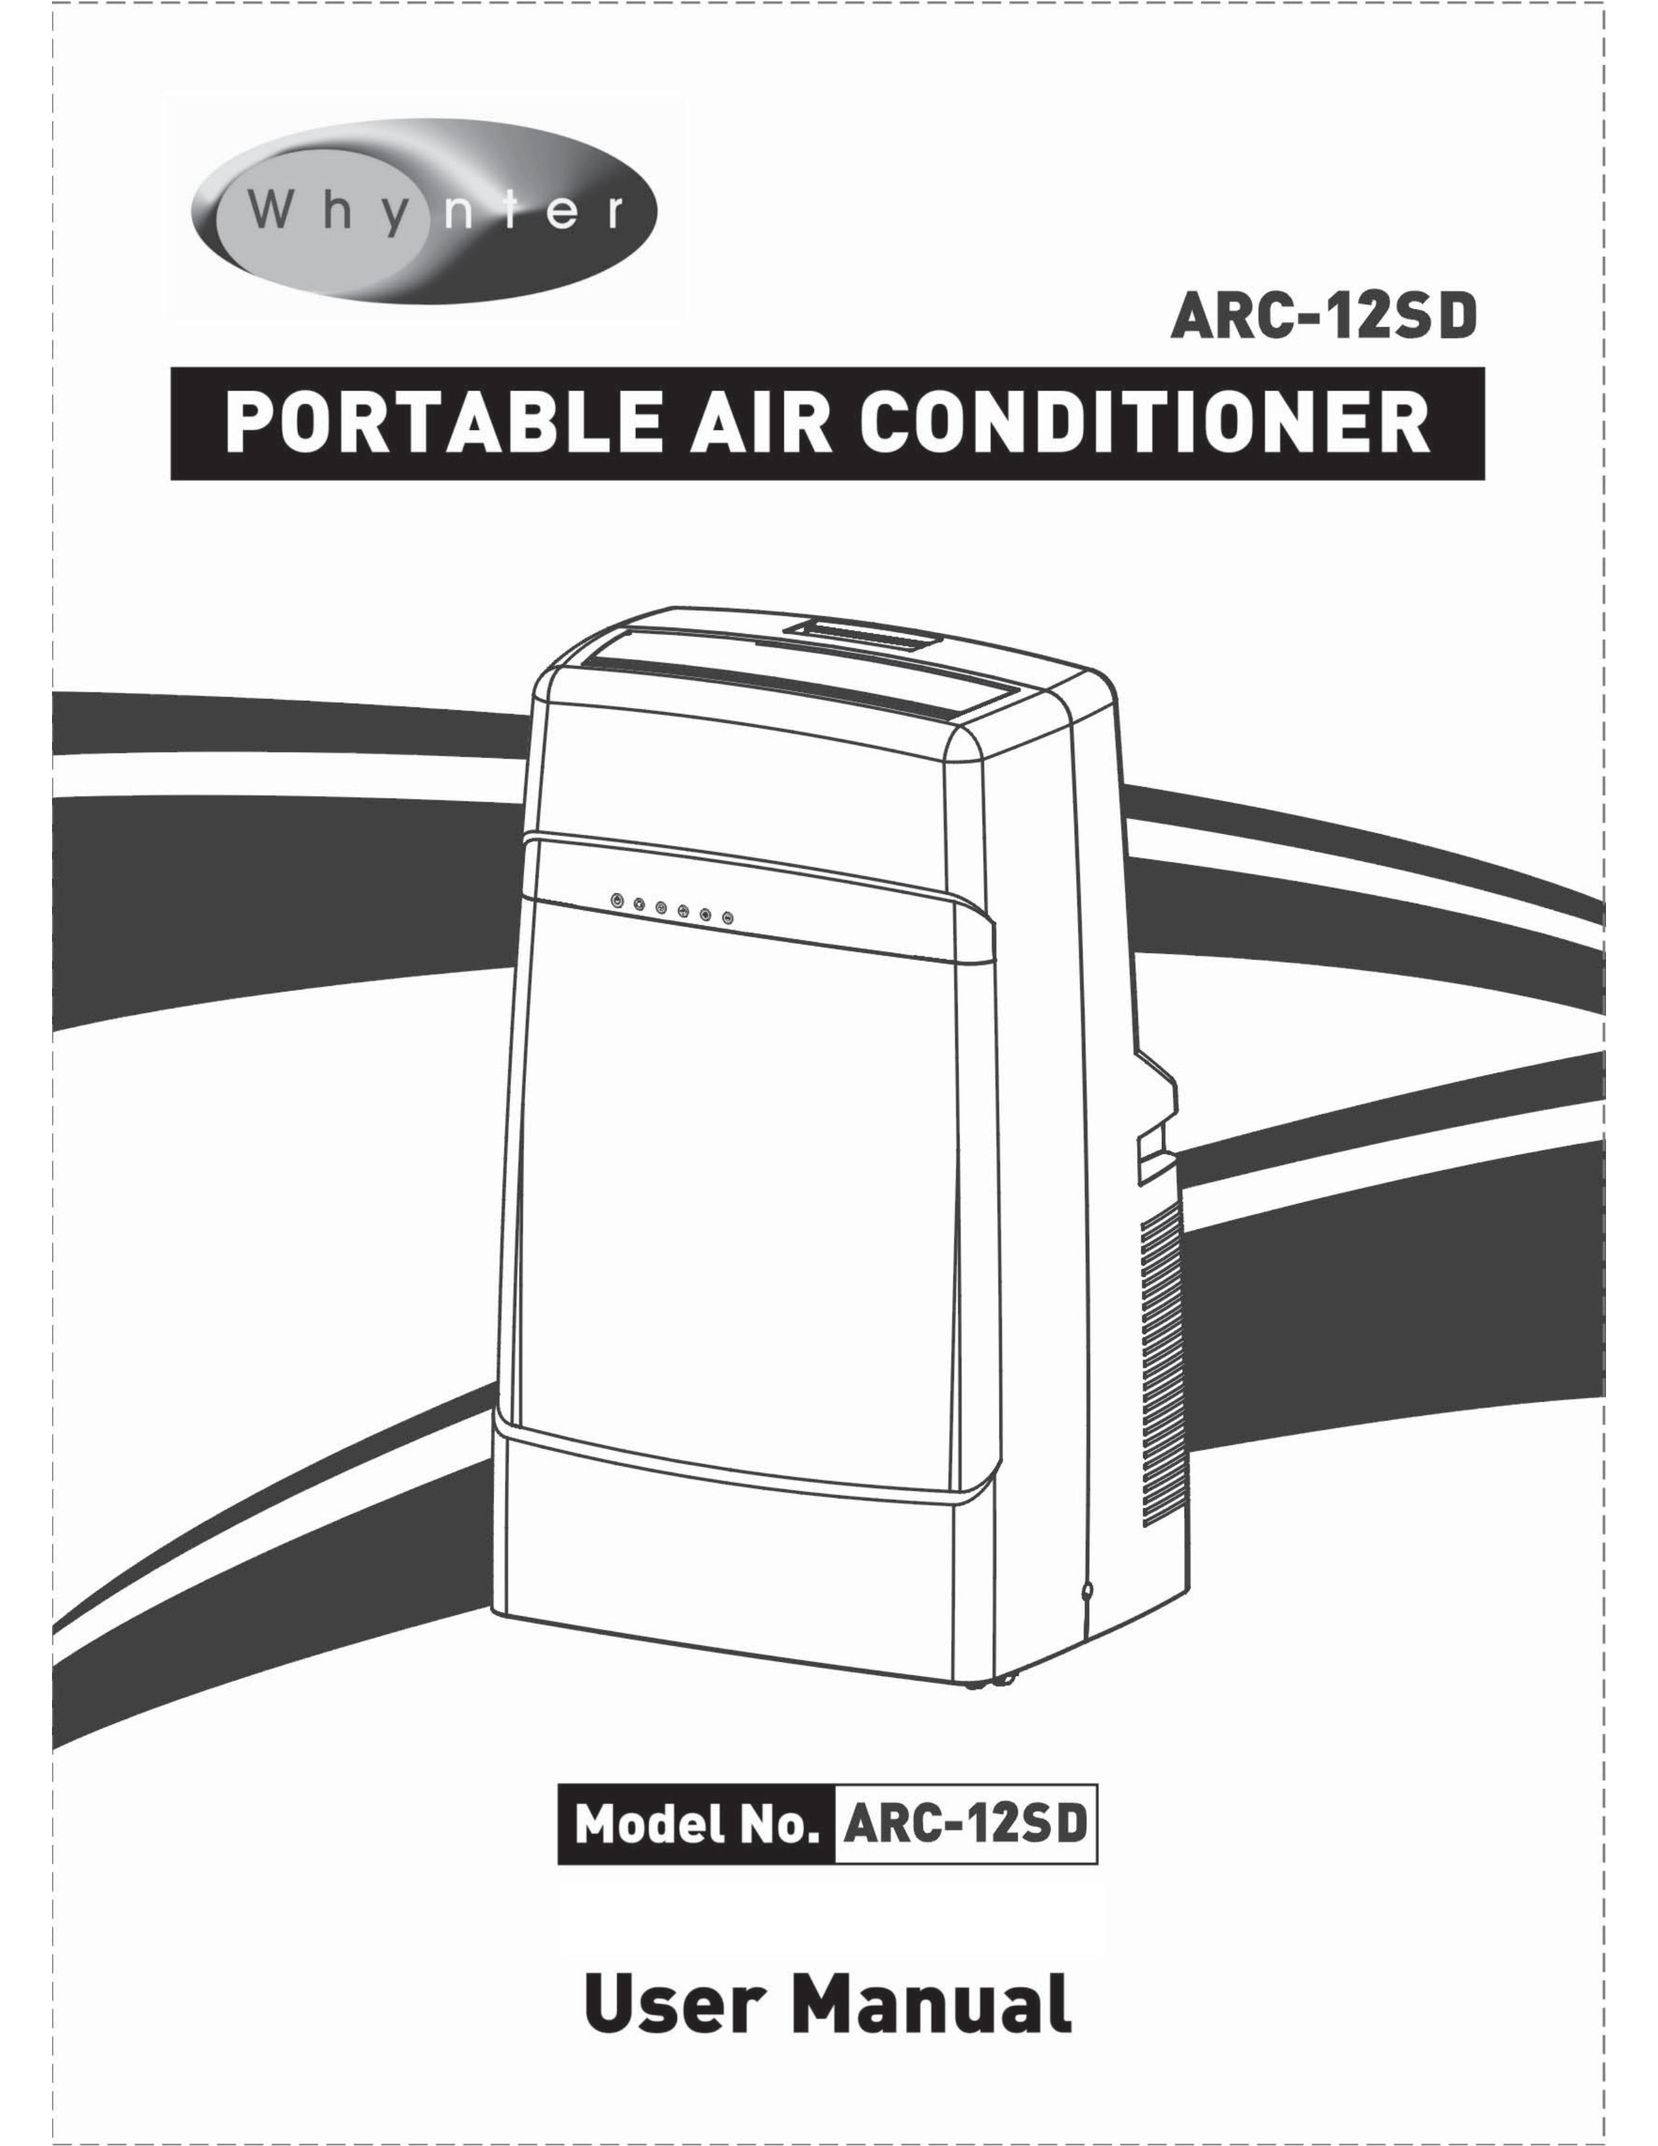 Whynter ARC-12SD Air Conditioner User Manual